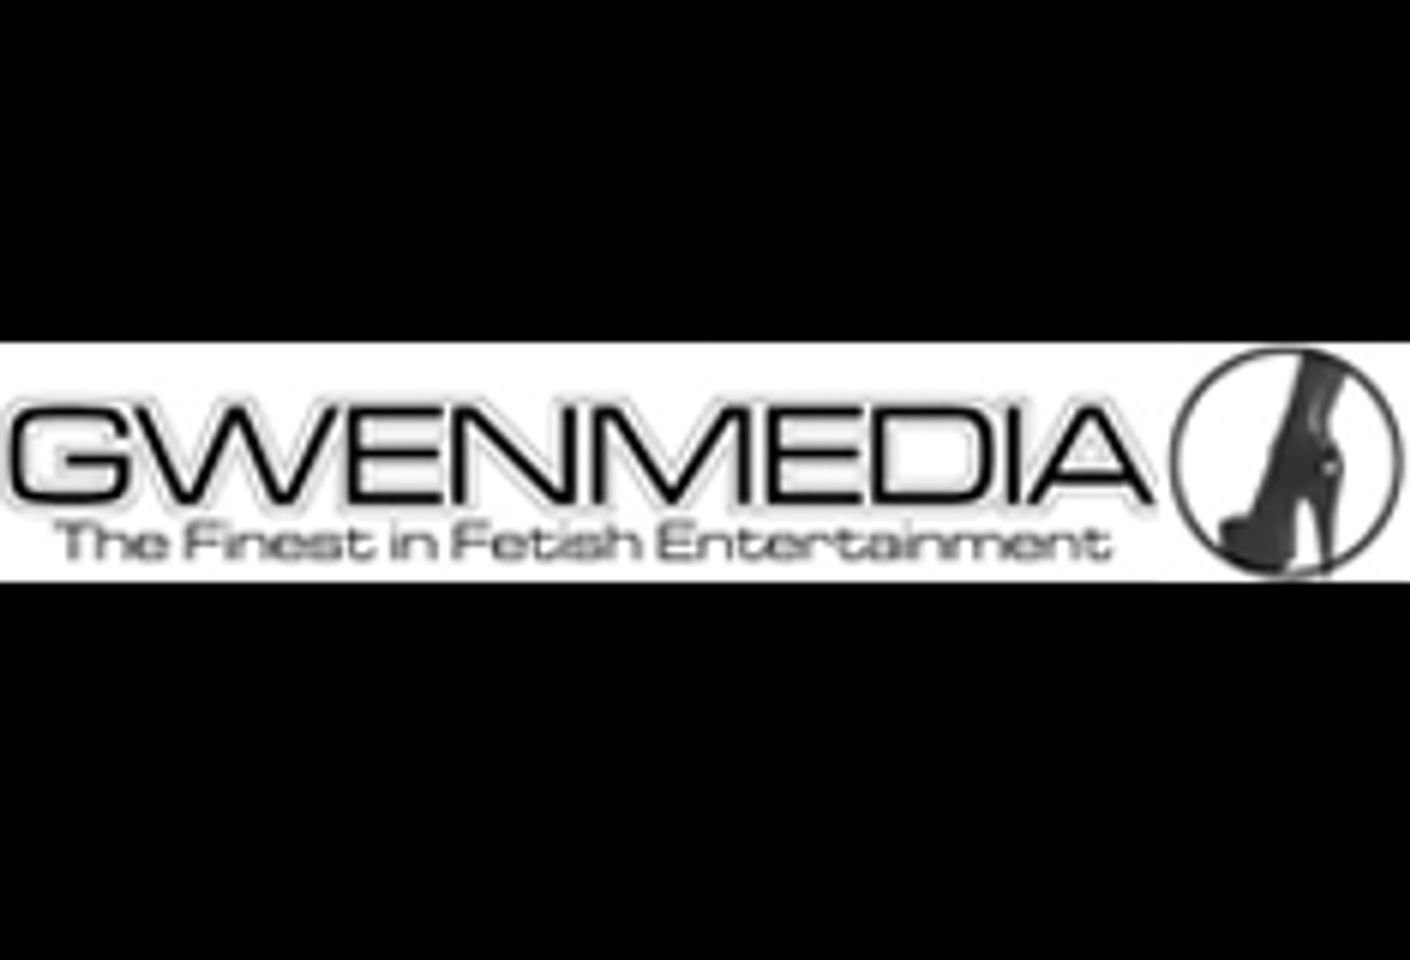 GwenMedia Site Re-Launched After Ownership Trial